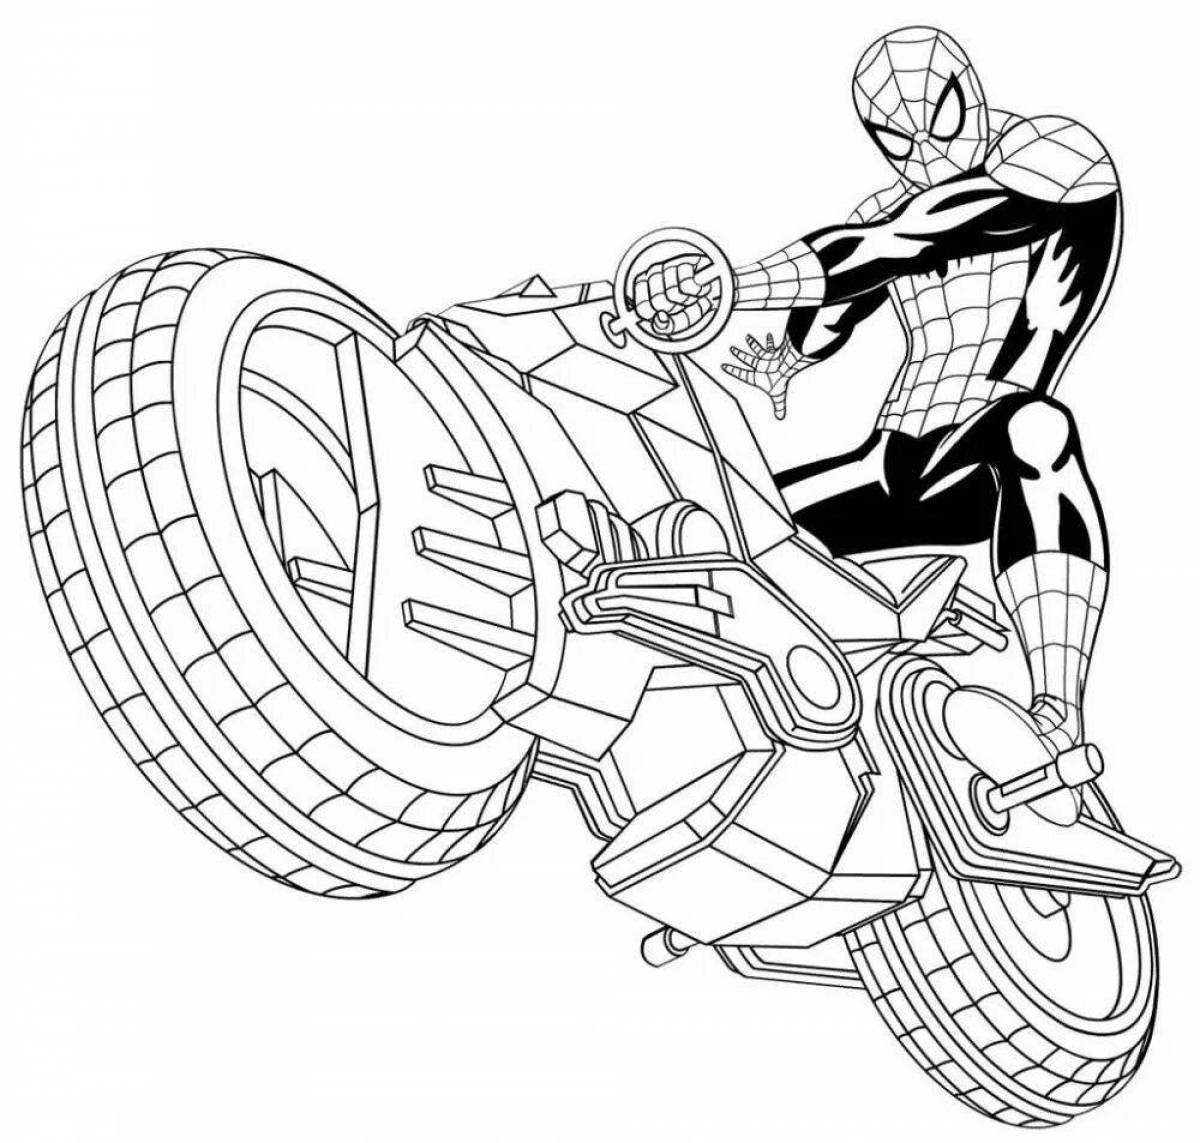 Intricate spider-man coloring page